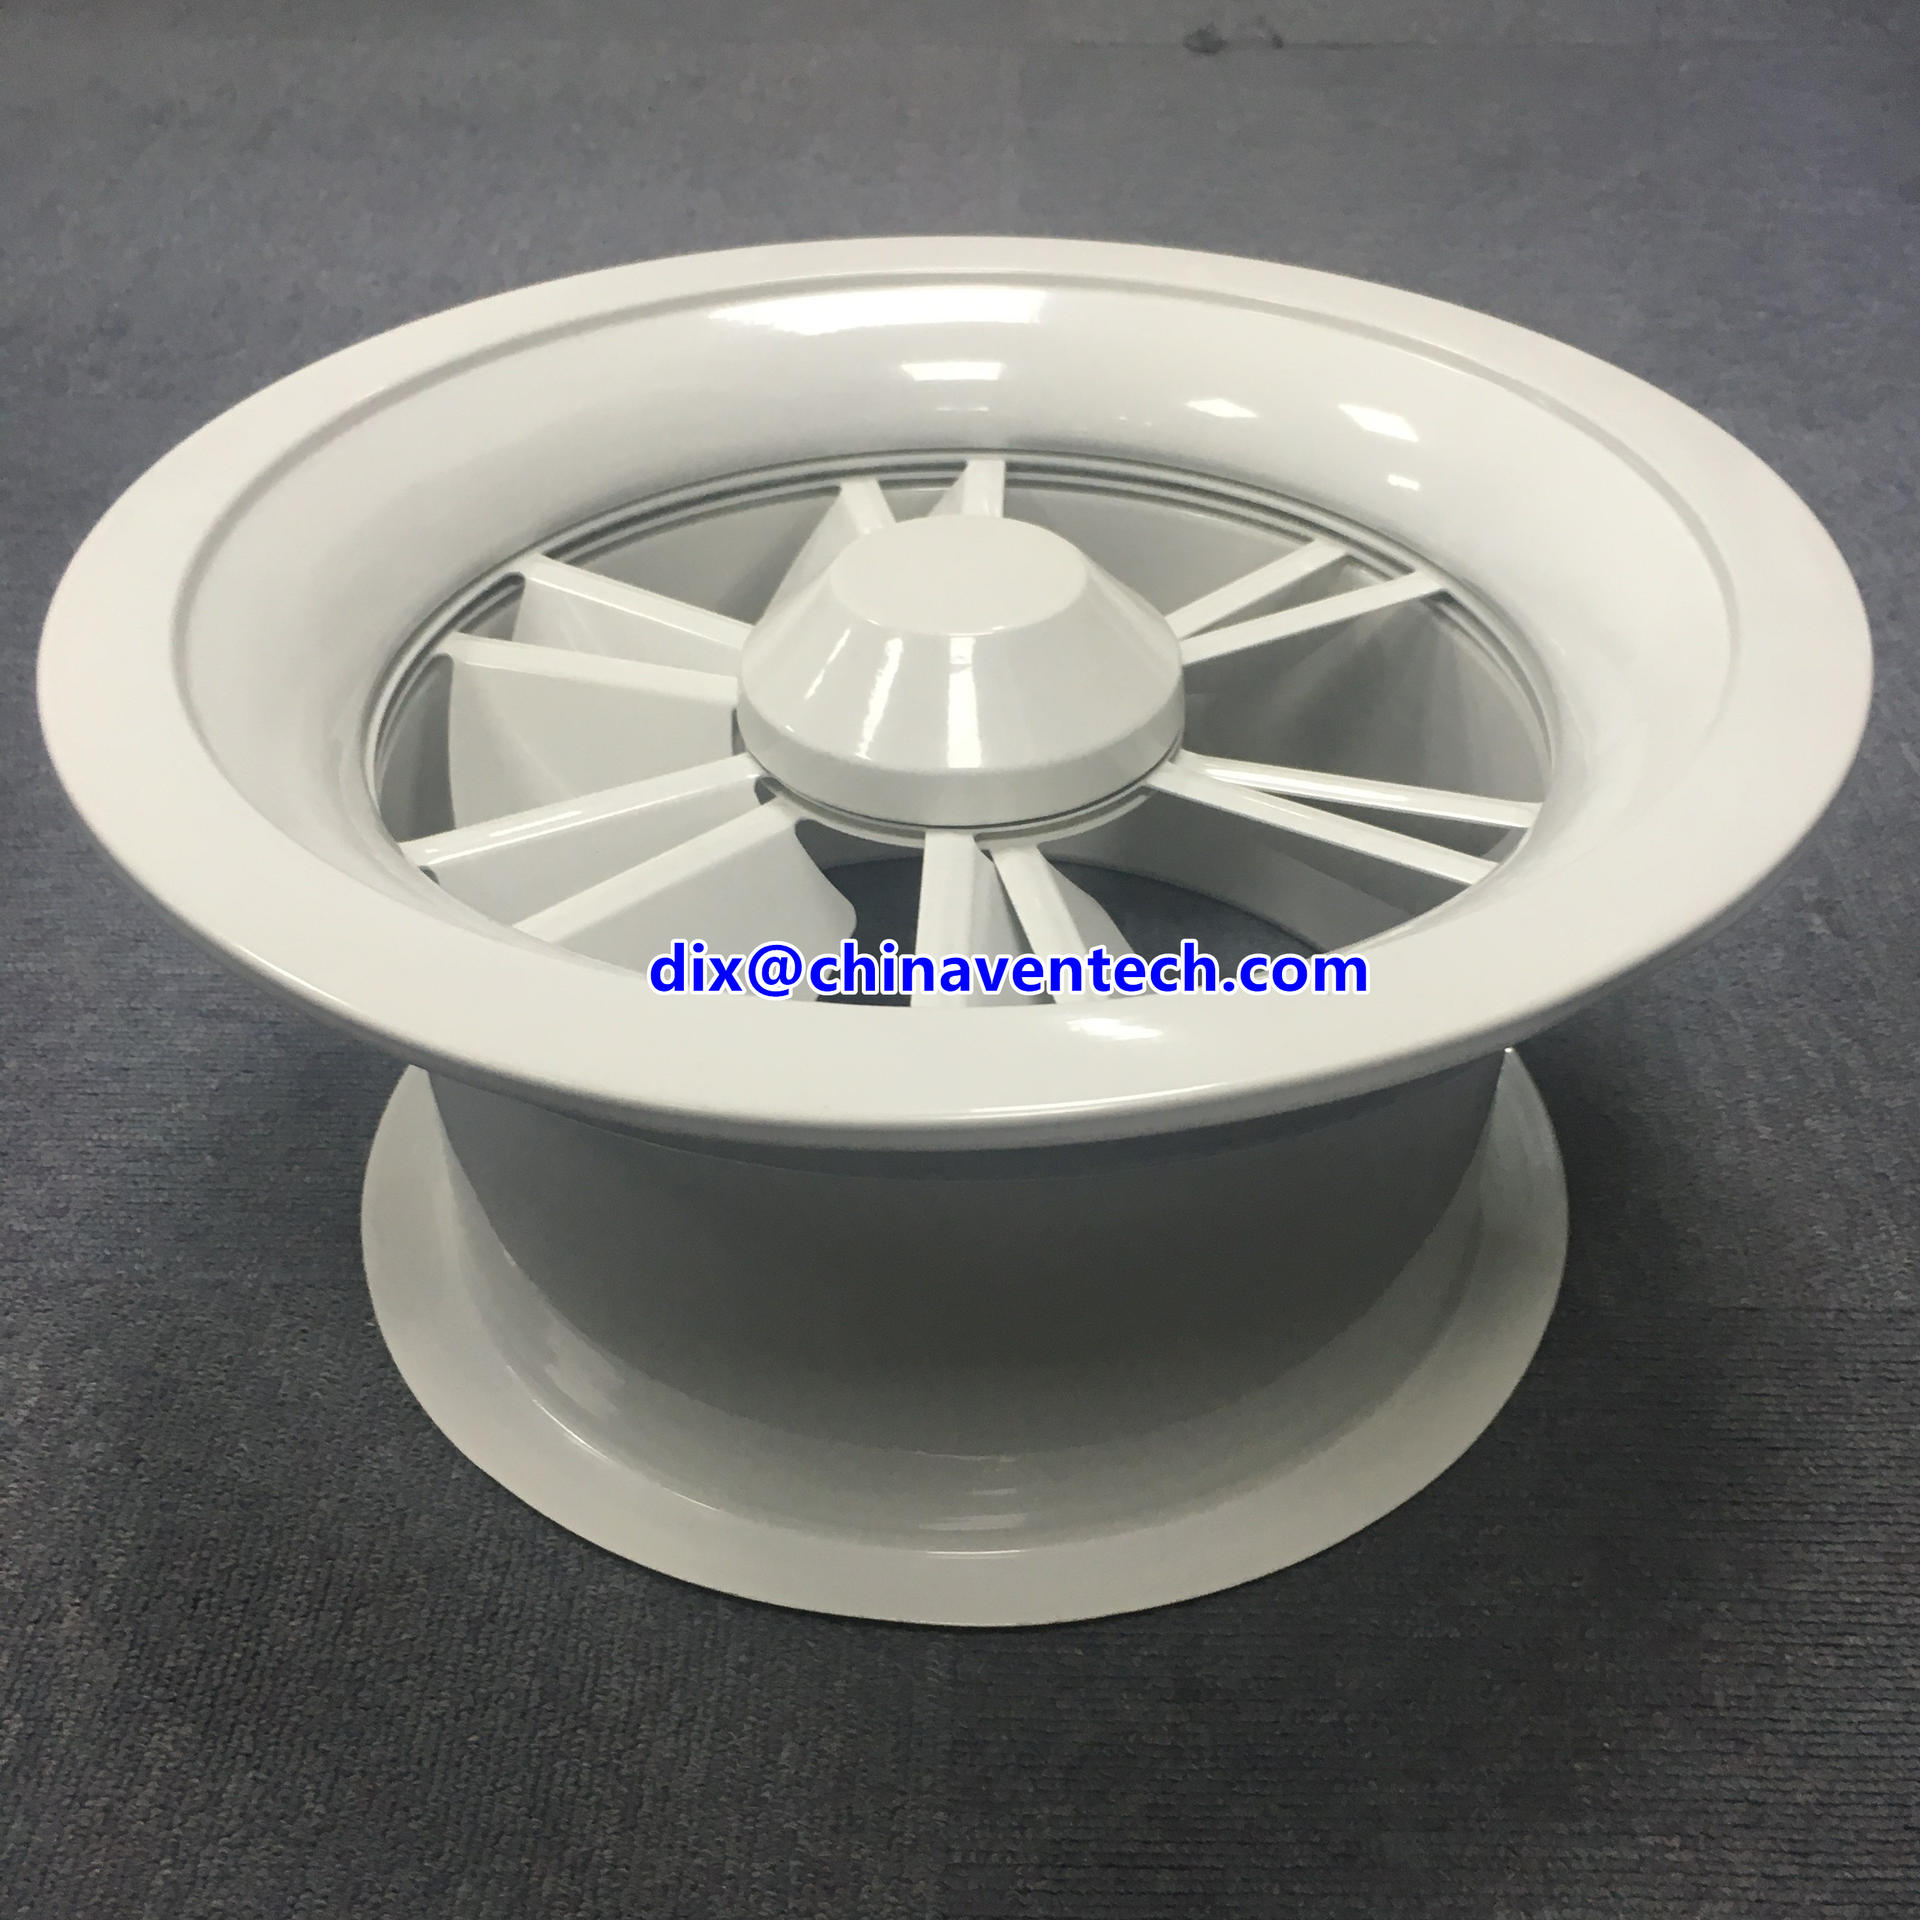 Havc Air Conditioning System Air Duct Round Air Grille Circular Swirl Diffuser